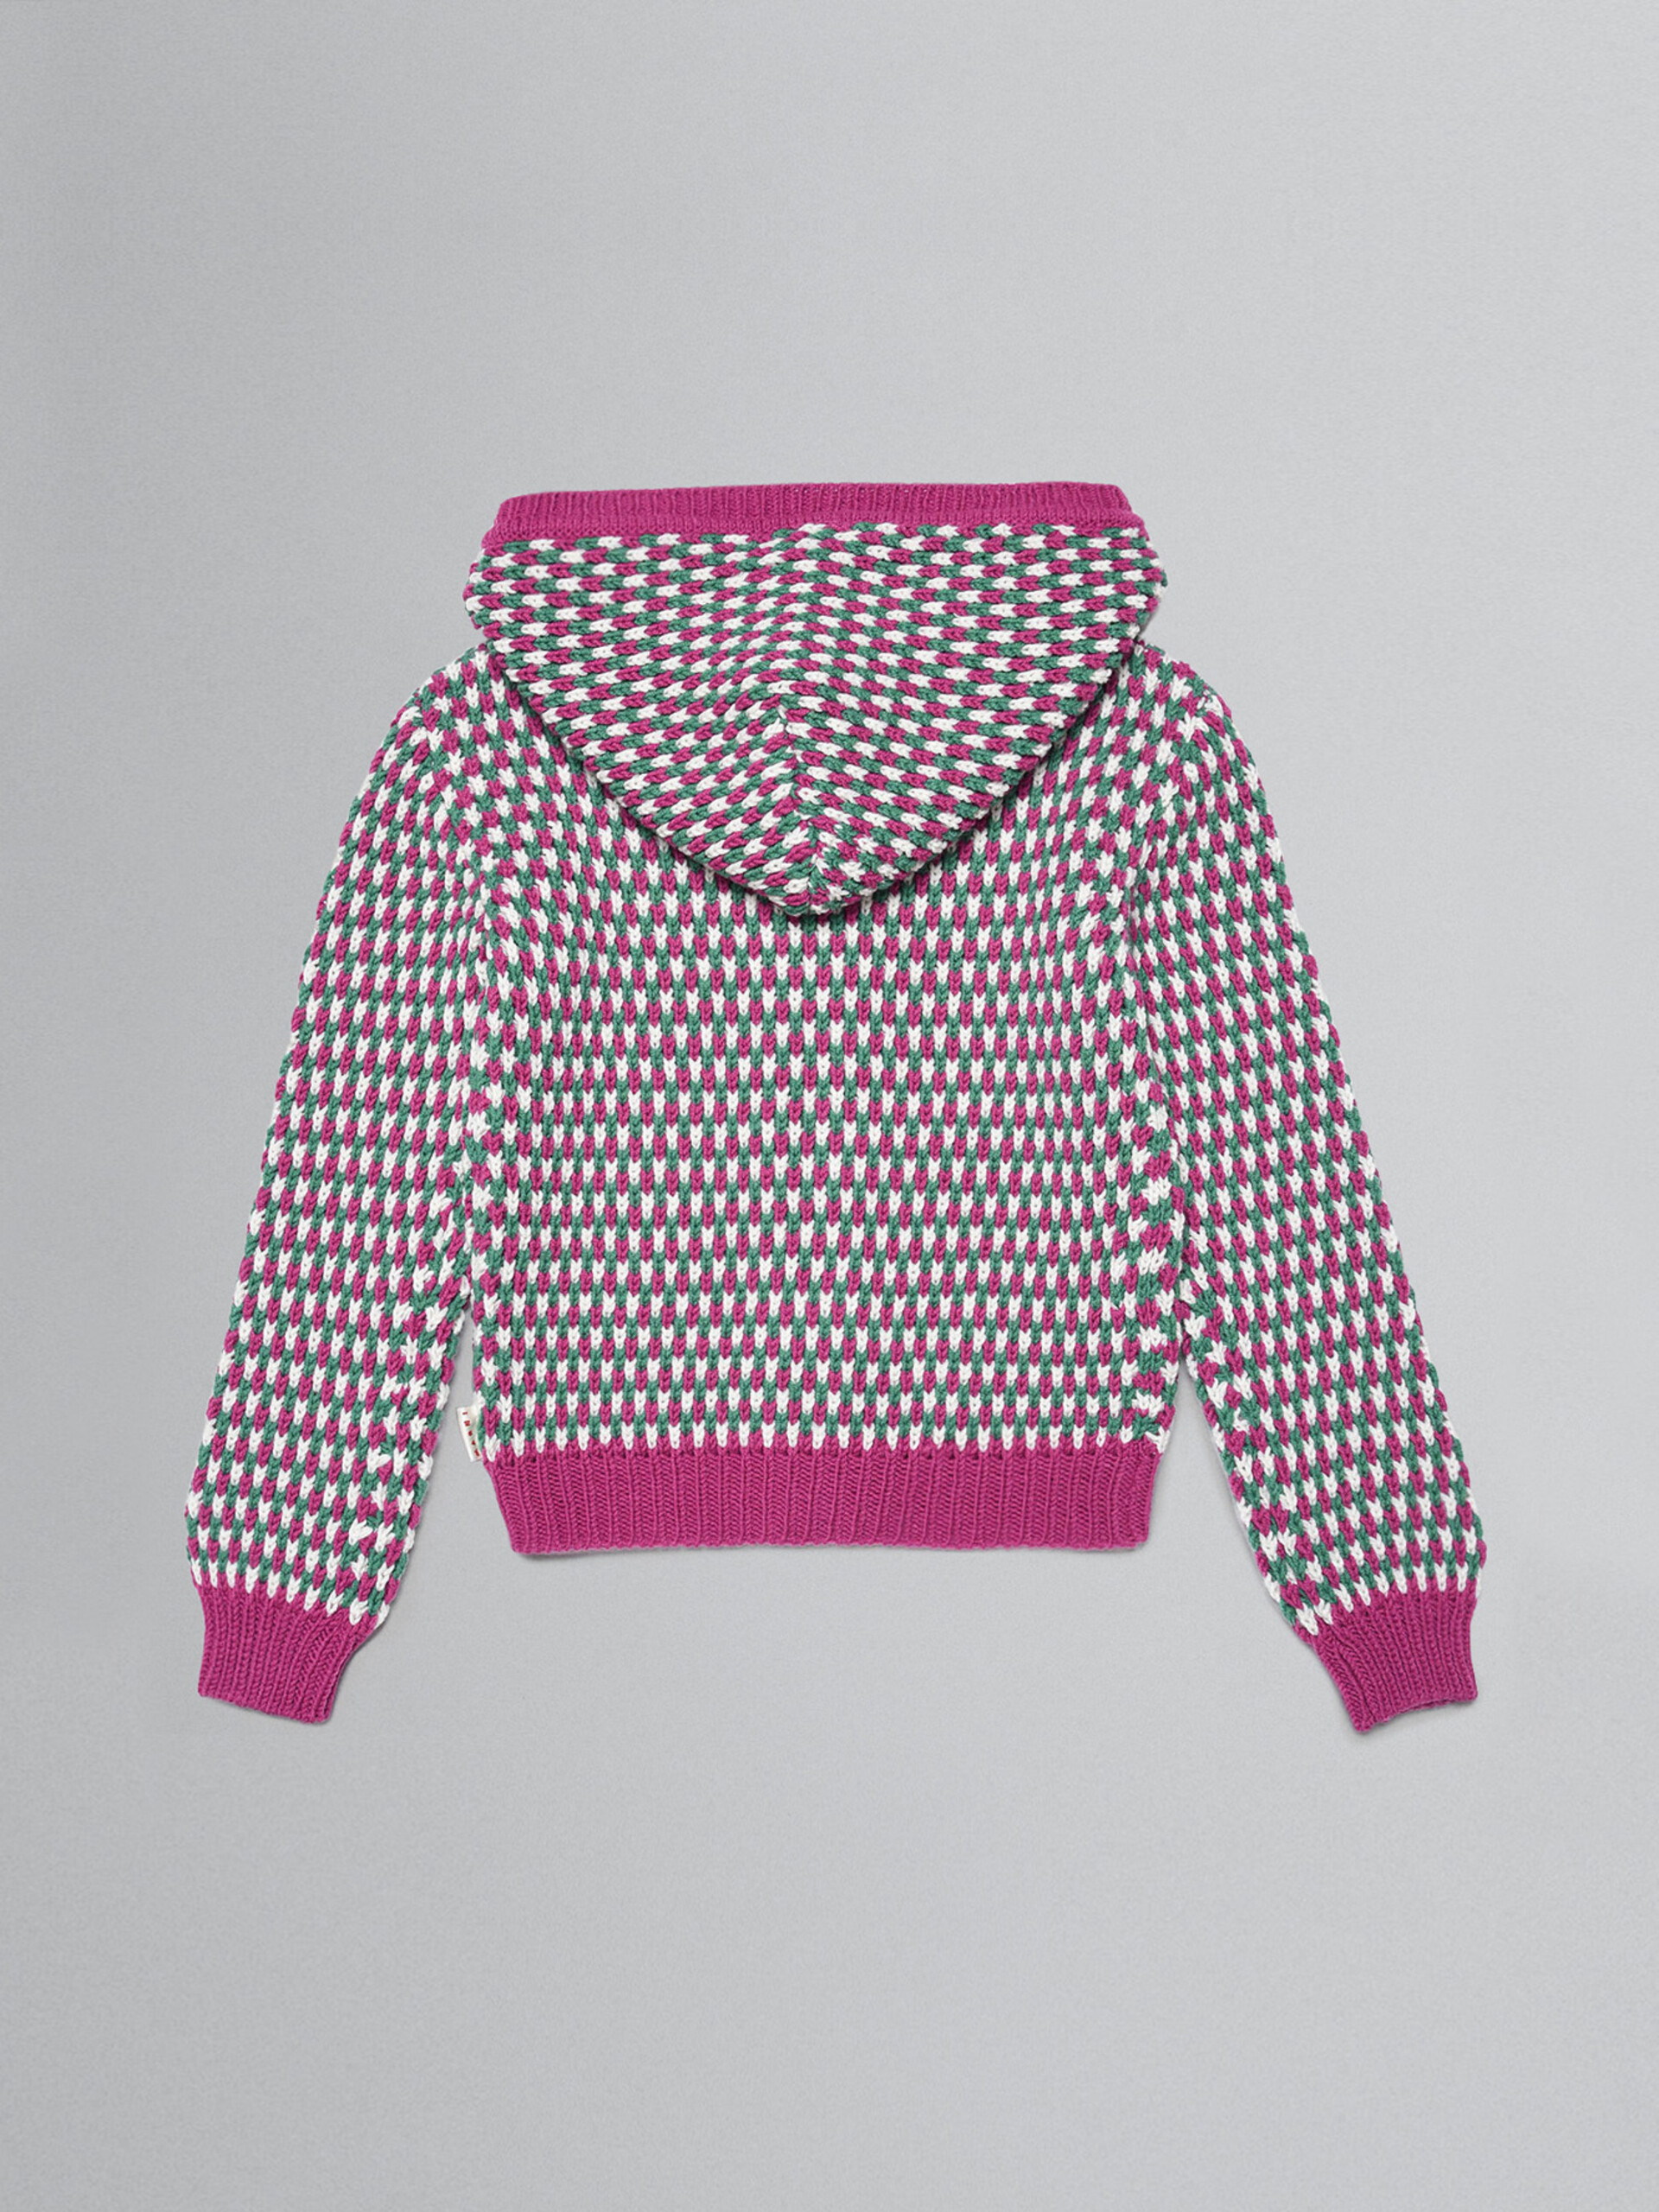 Multicolour knitted cardigan with zip - Knitwear - Image 2